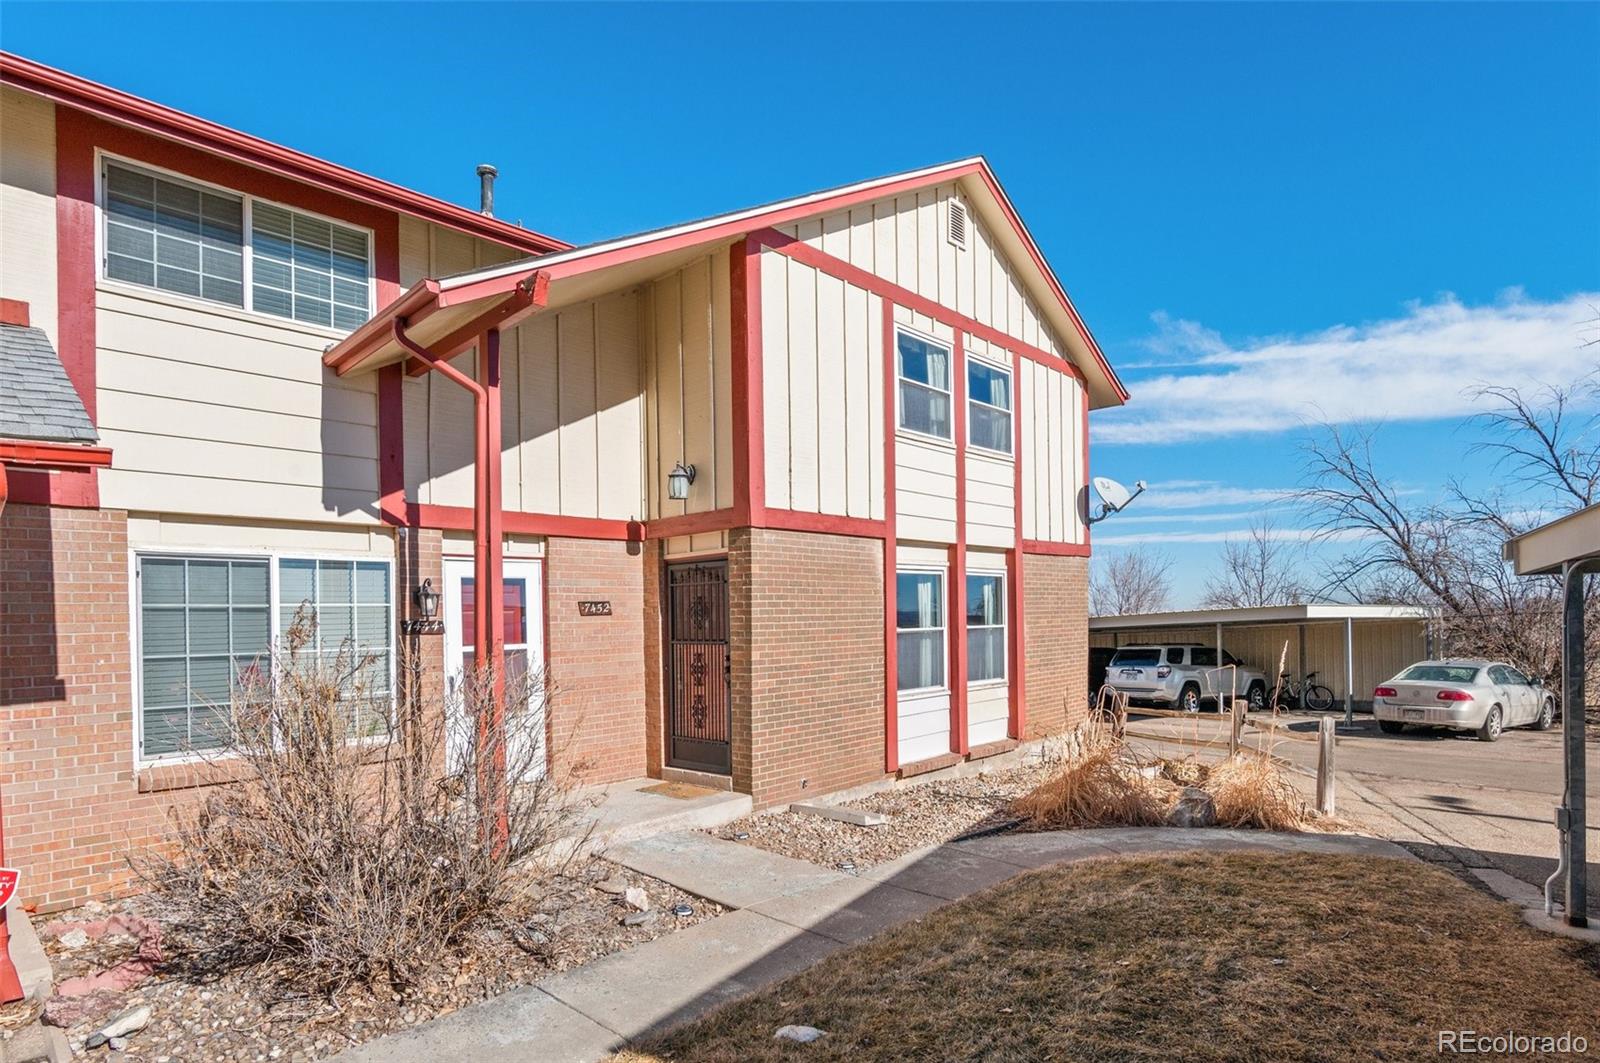 7452 s zephyr court, Littleton sold home. Closed on 2024-04-19 for $435,000.